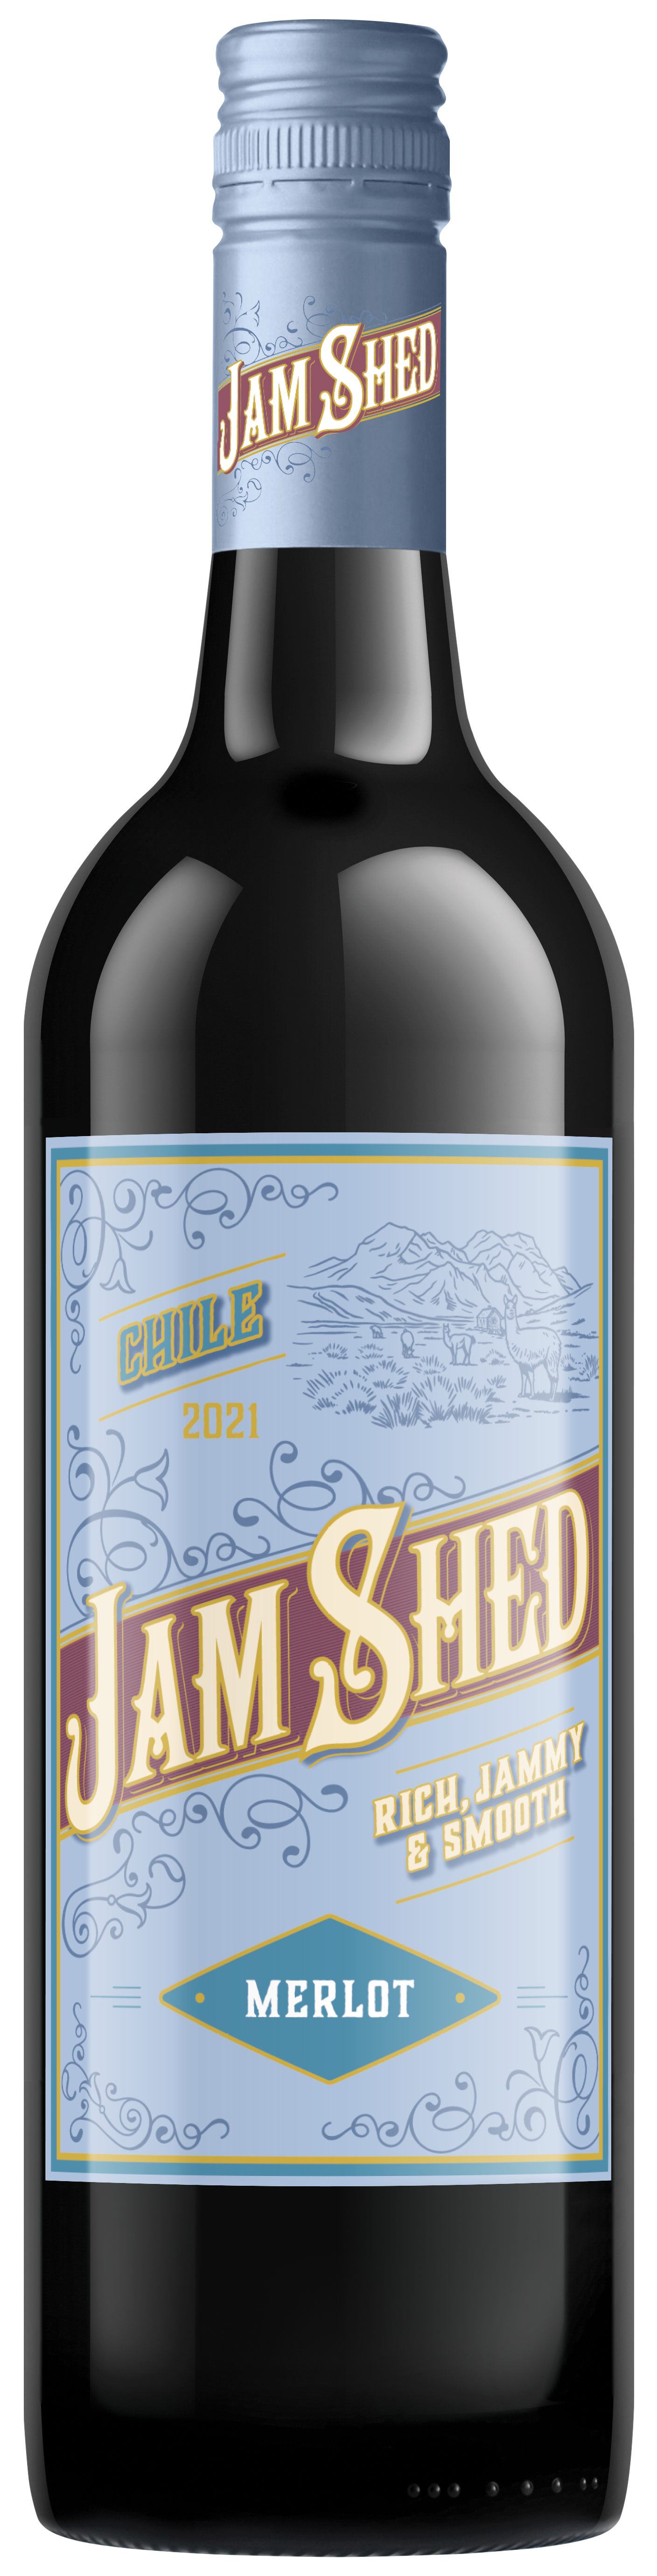 Jam Shed expands portfolio with new Chilean Merlot